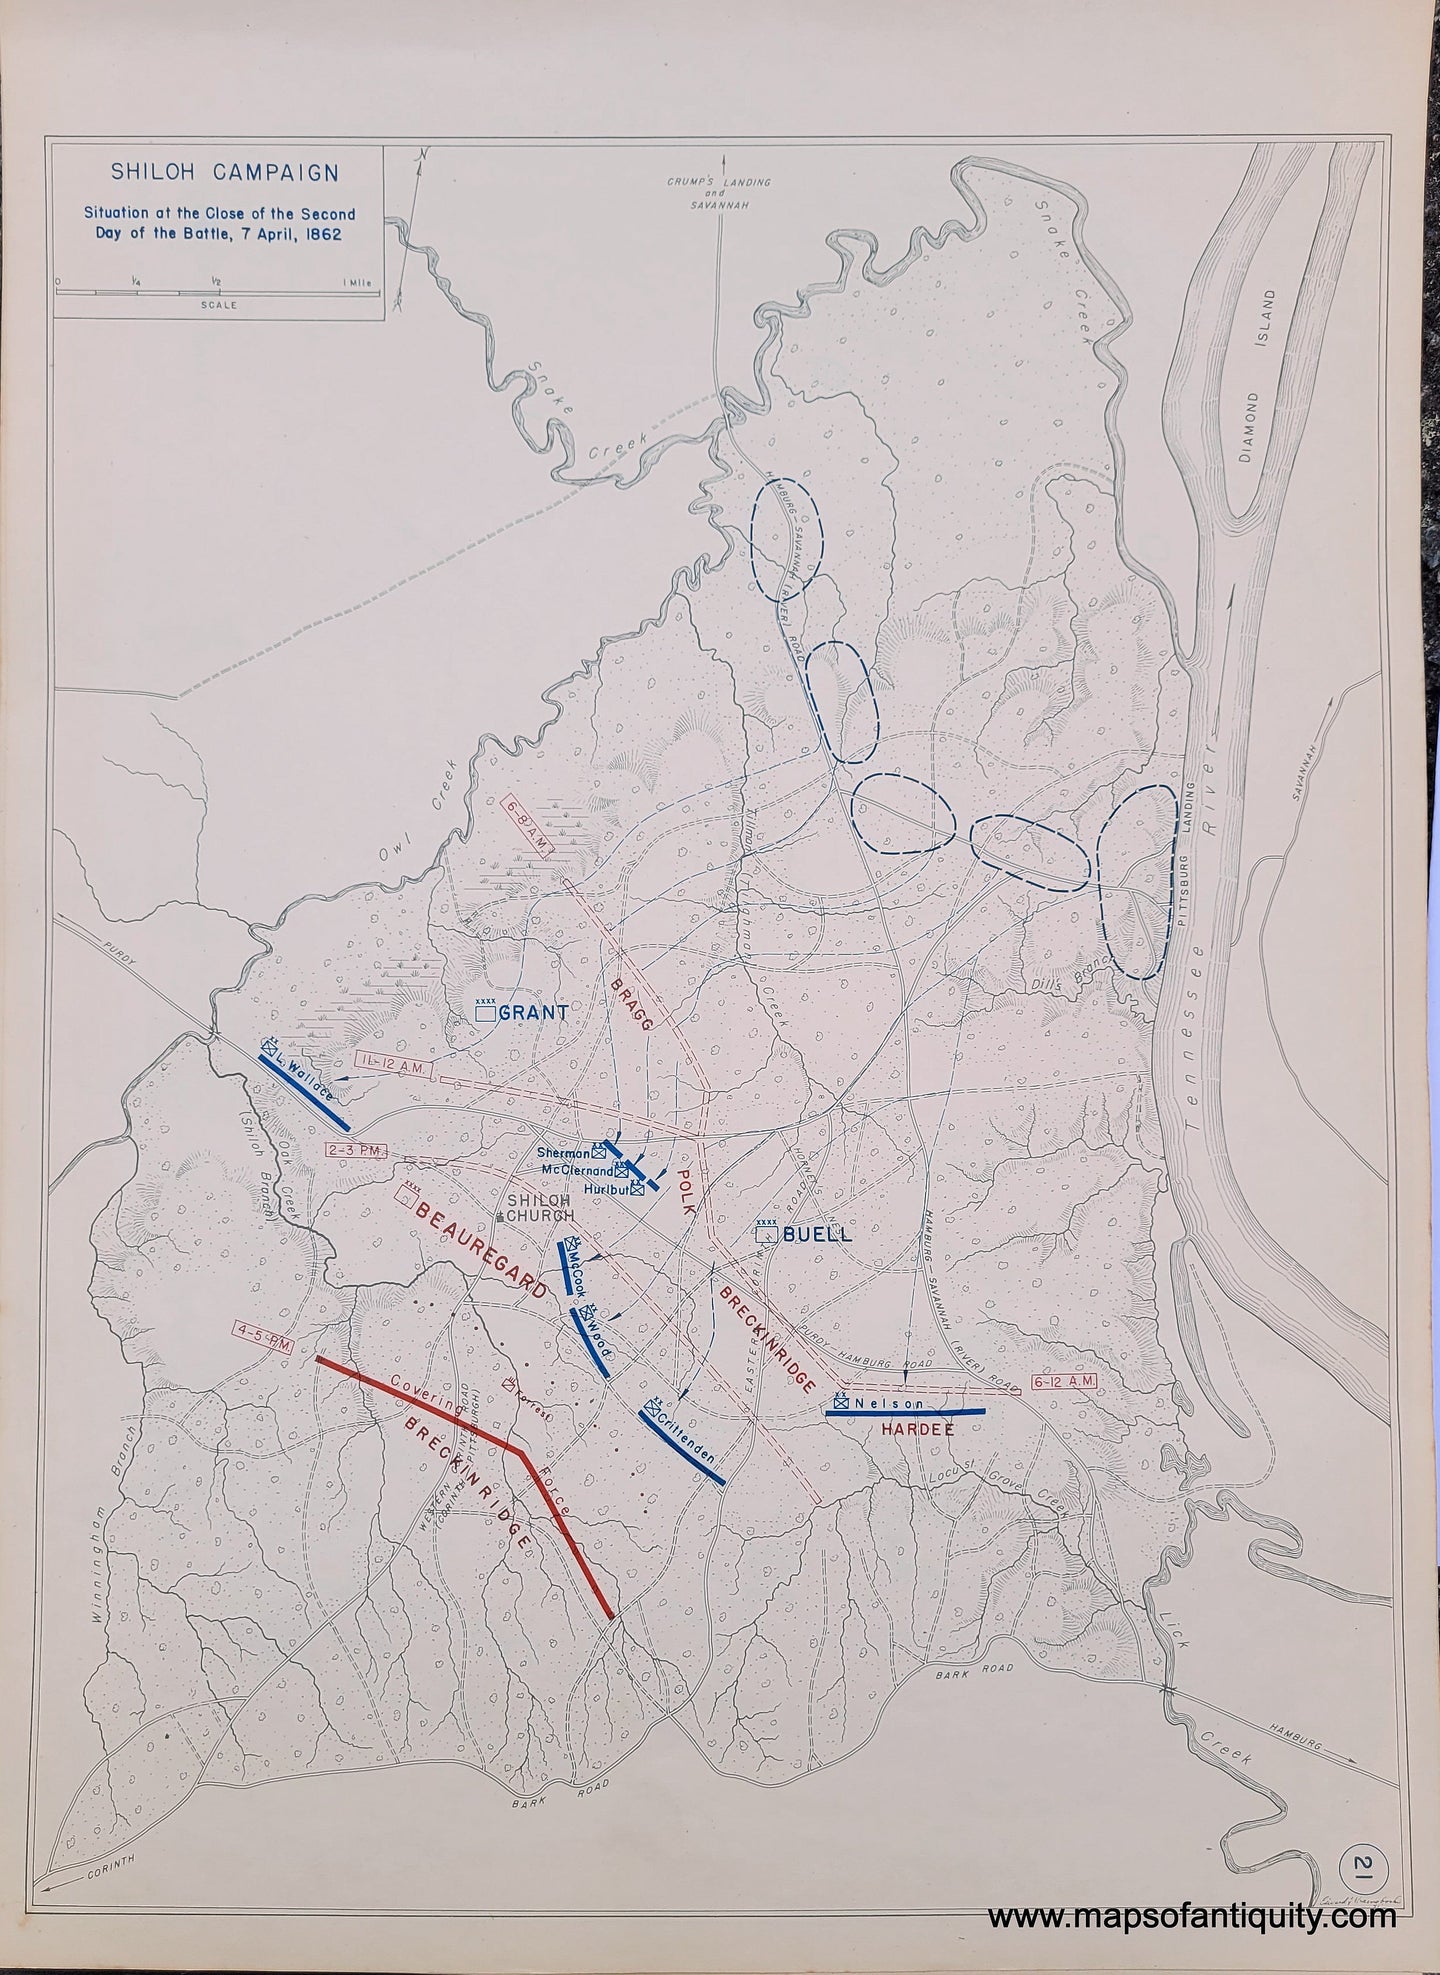 Genuine-Antique-Map-Shiloh-Campaign-Situation-at-the-Close-of-the-Second-Day-of-the-Battle-7-April-1862-1948-Matthew-Forney-Steele-Dept-of-Military-Art-and-Engineering-US-Military-Academy-West-Point-Maps-Of-Antiquity